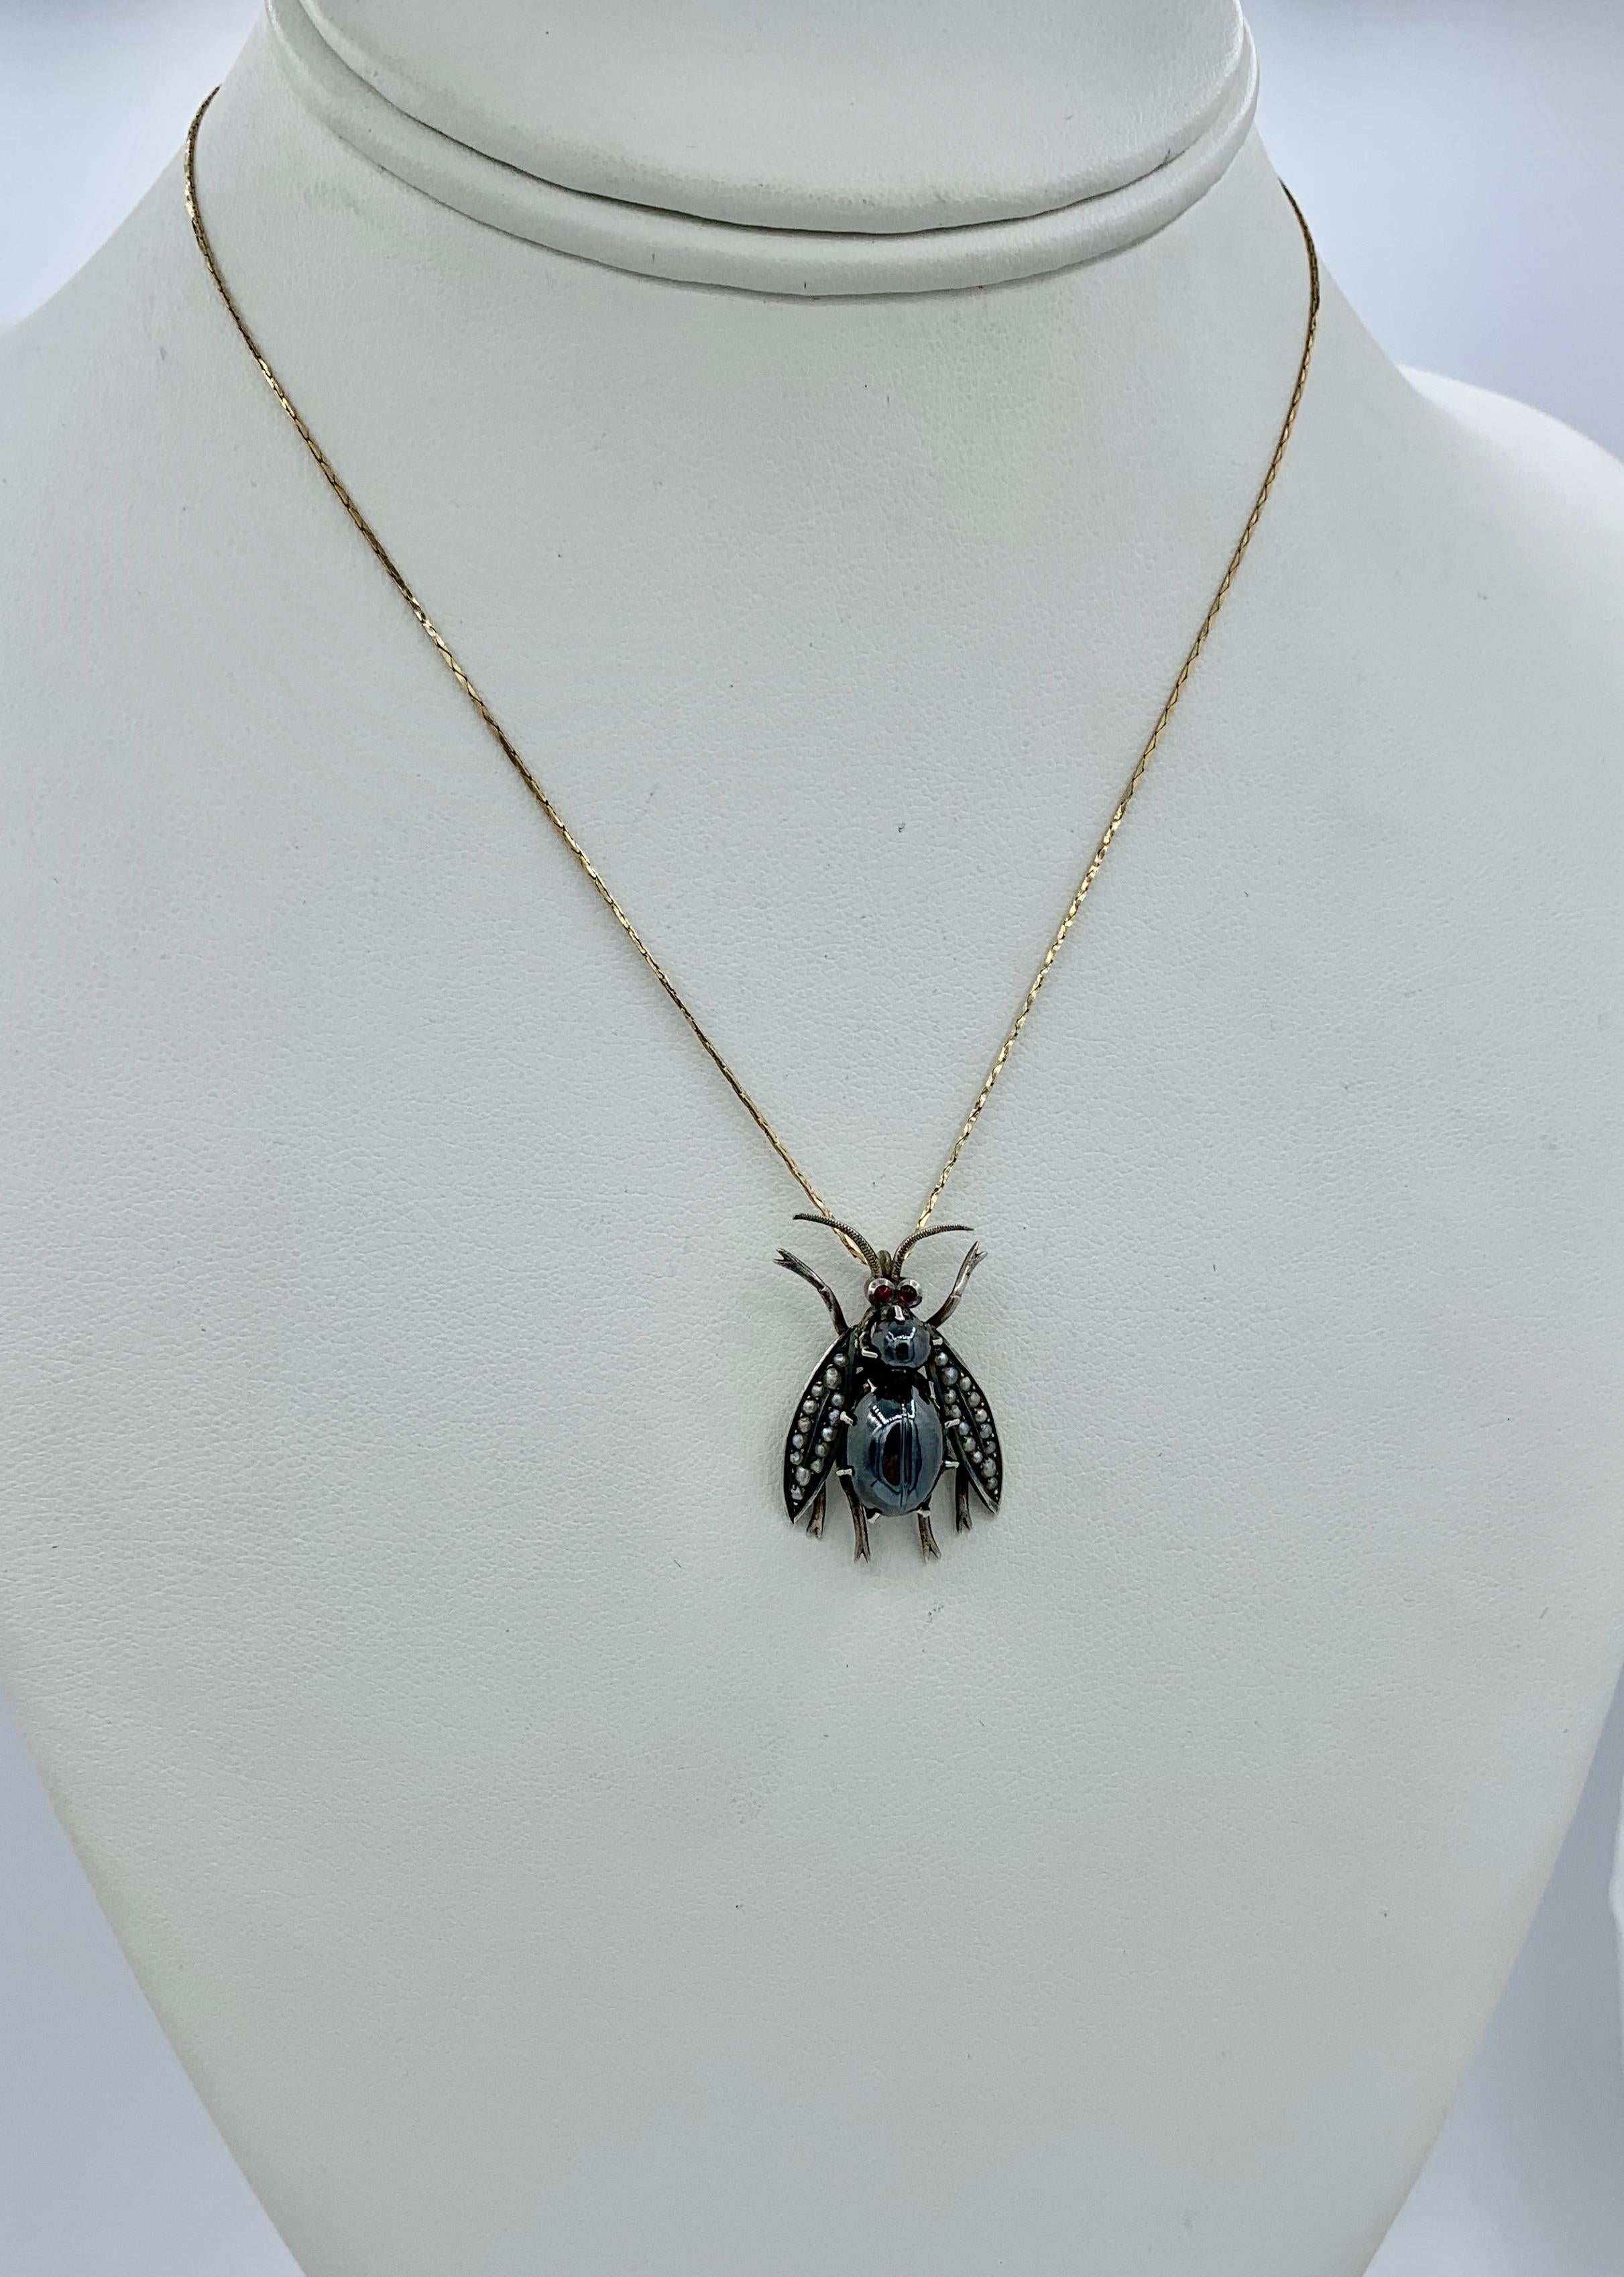 Women's or Men's Antique Hematite Ruby Pearl Fly Bug Insect Pendant Victorian Edwardian For Sale